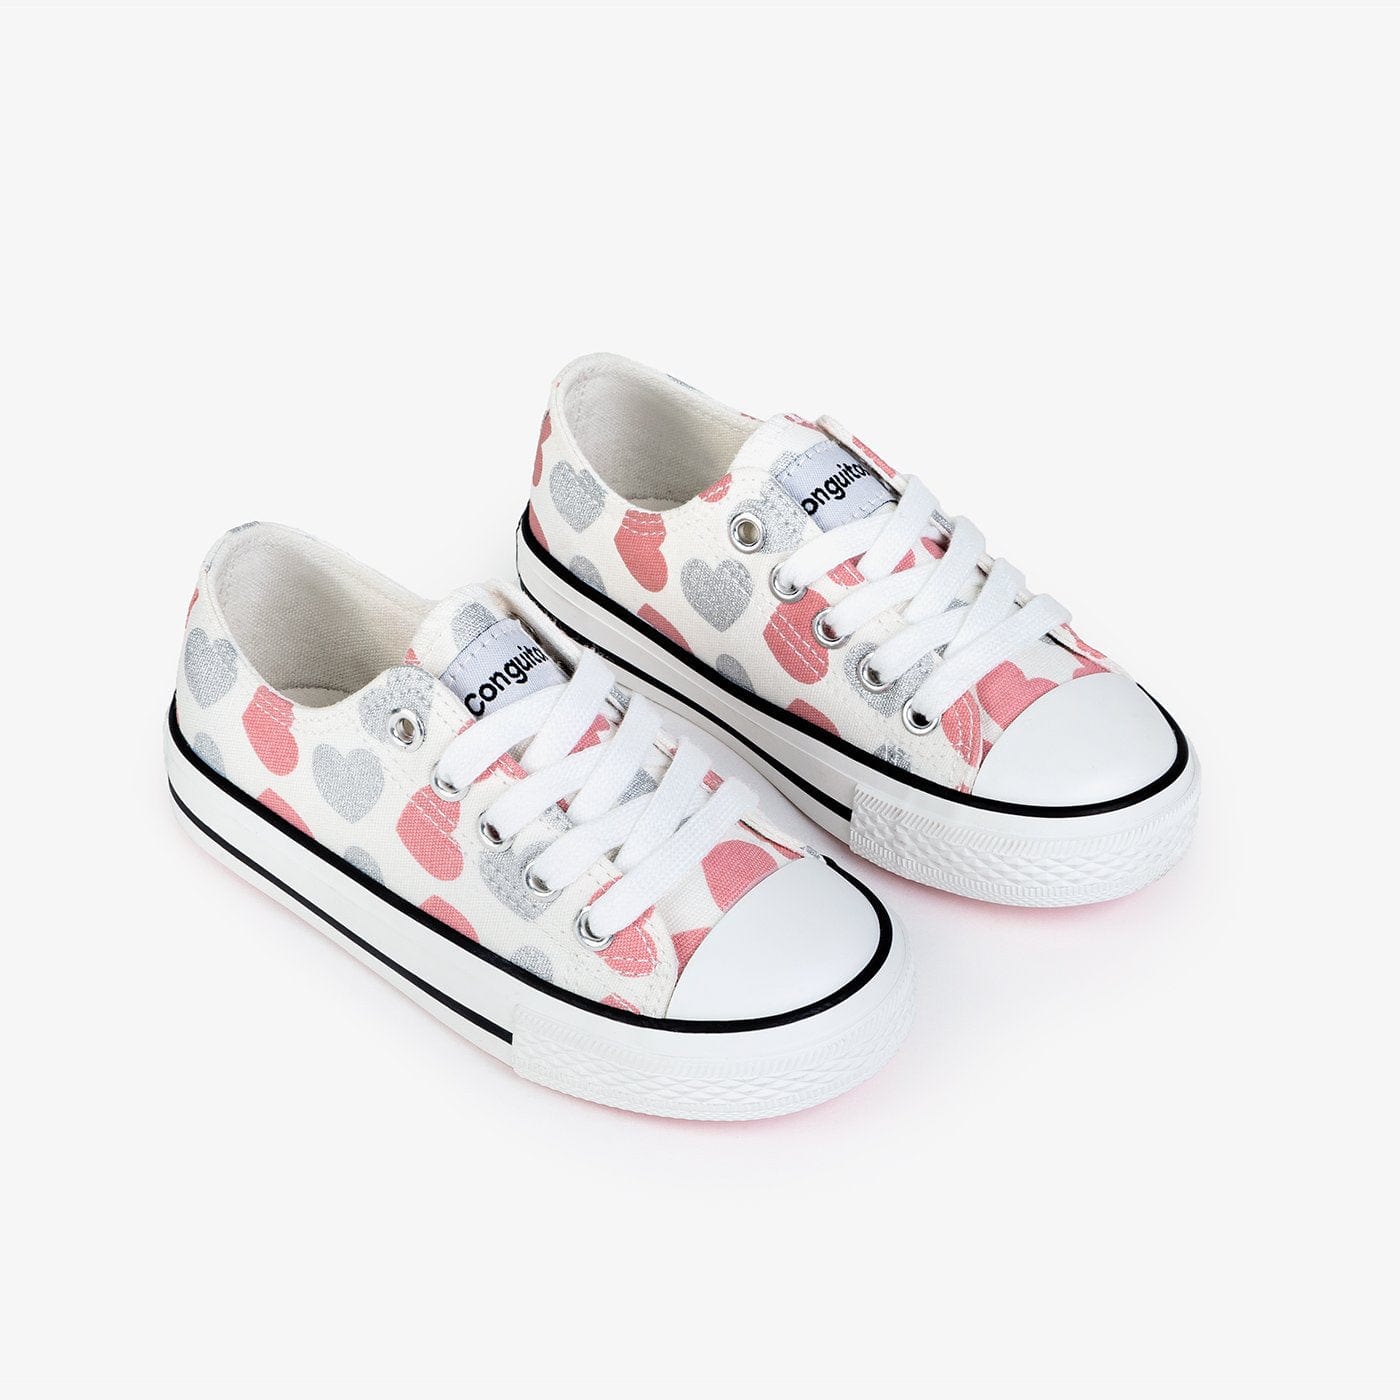 CONGUITOS Shoes Girl's Hearts White Canvas Sneakers